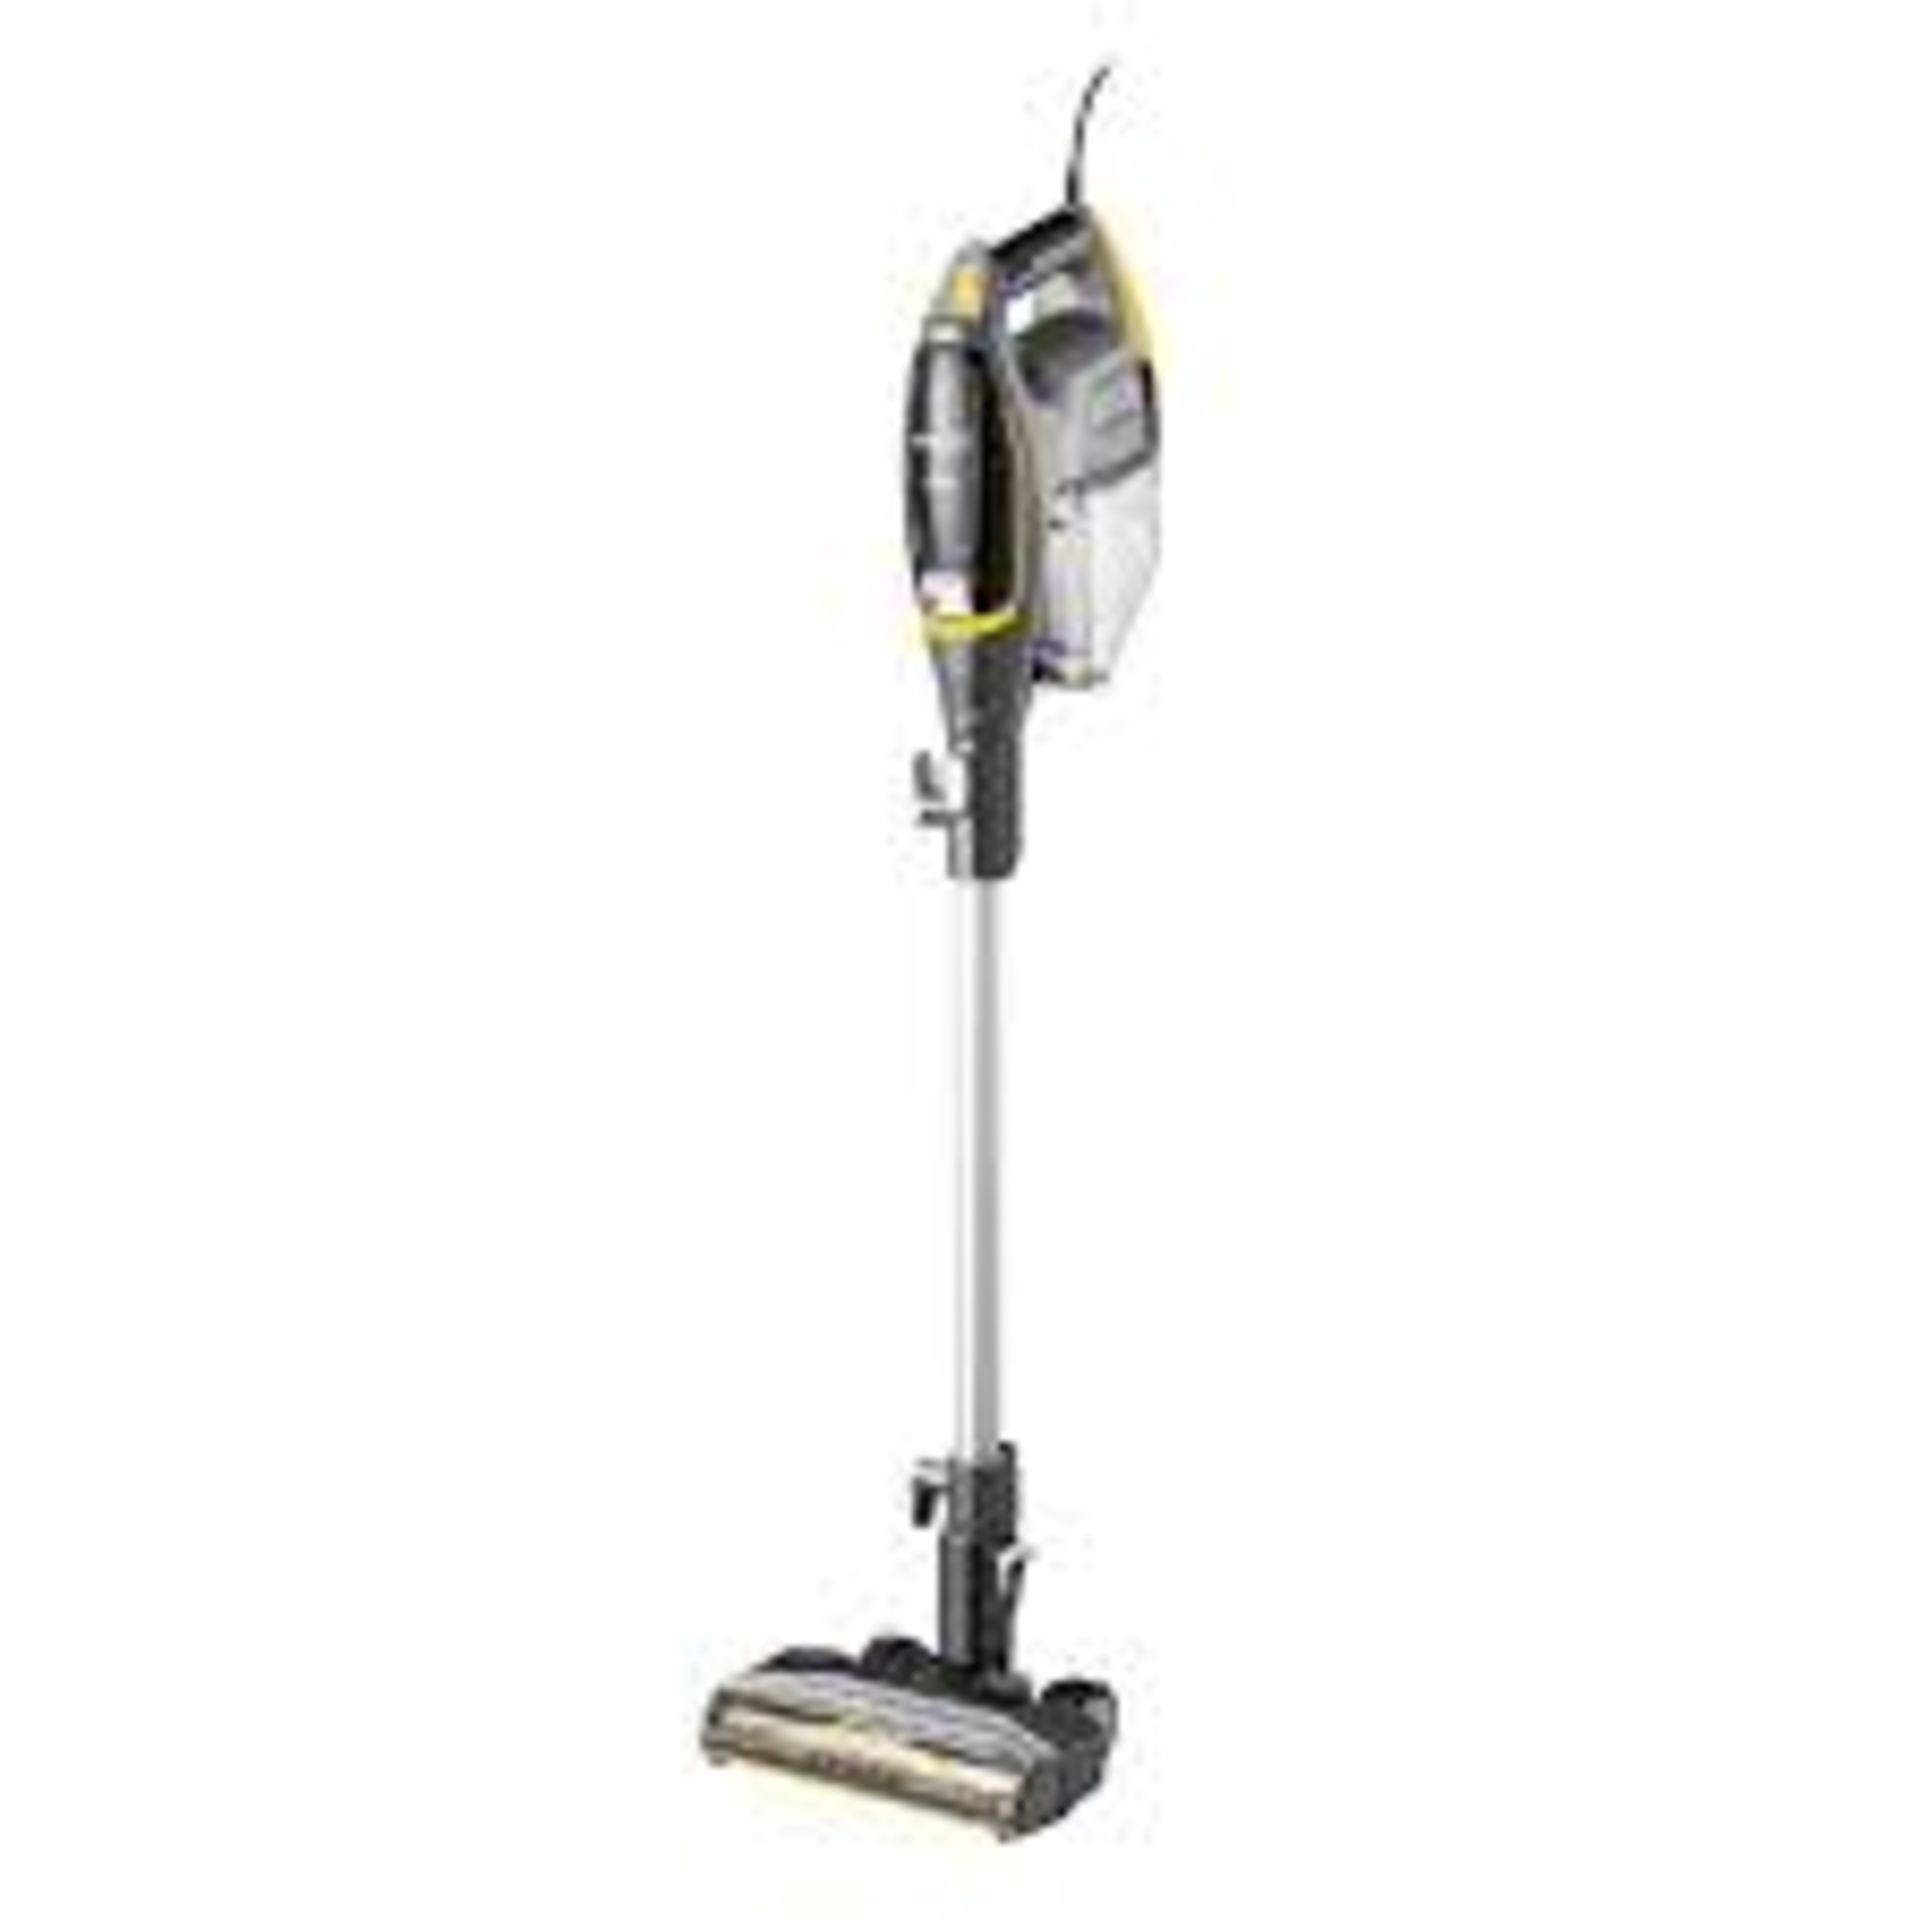 BRAND NEW Eureka NES510 2-in-1 Corded Stick & Handheld Vacuum Cleaner, 400W Motor for Whole House, - Bild 2 aus 3